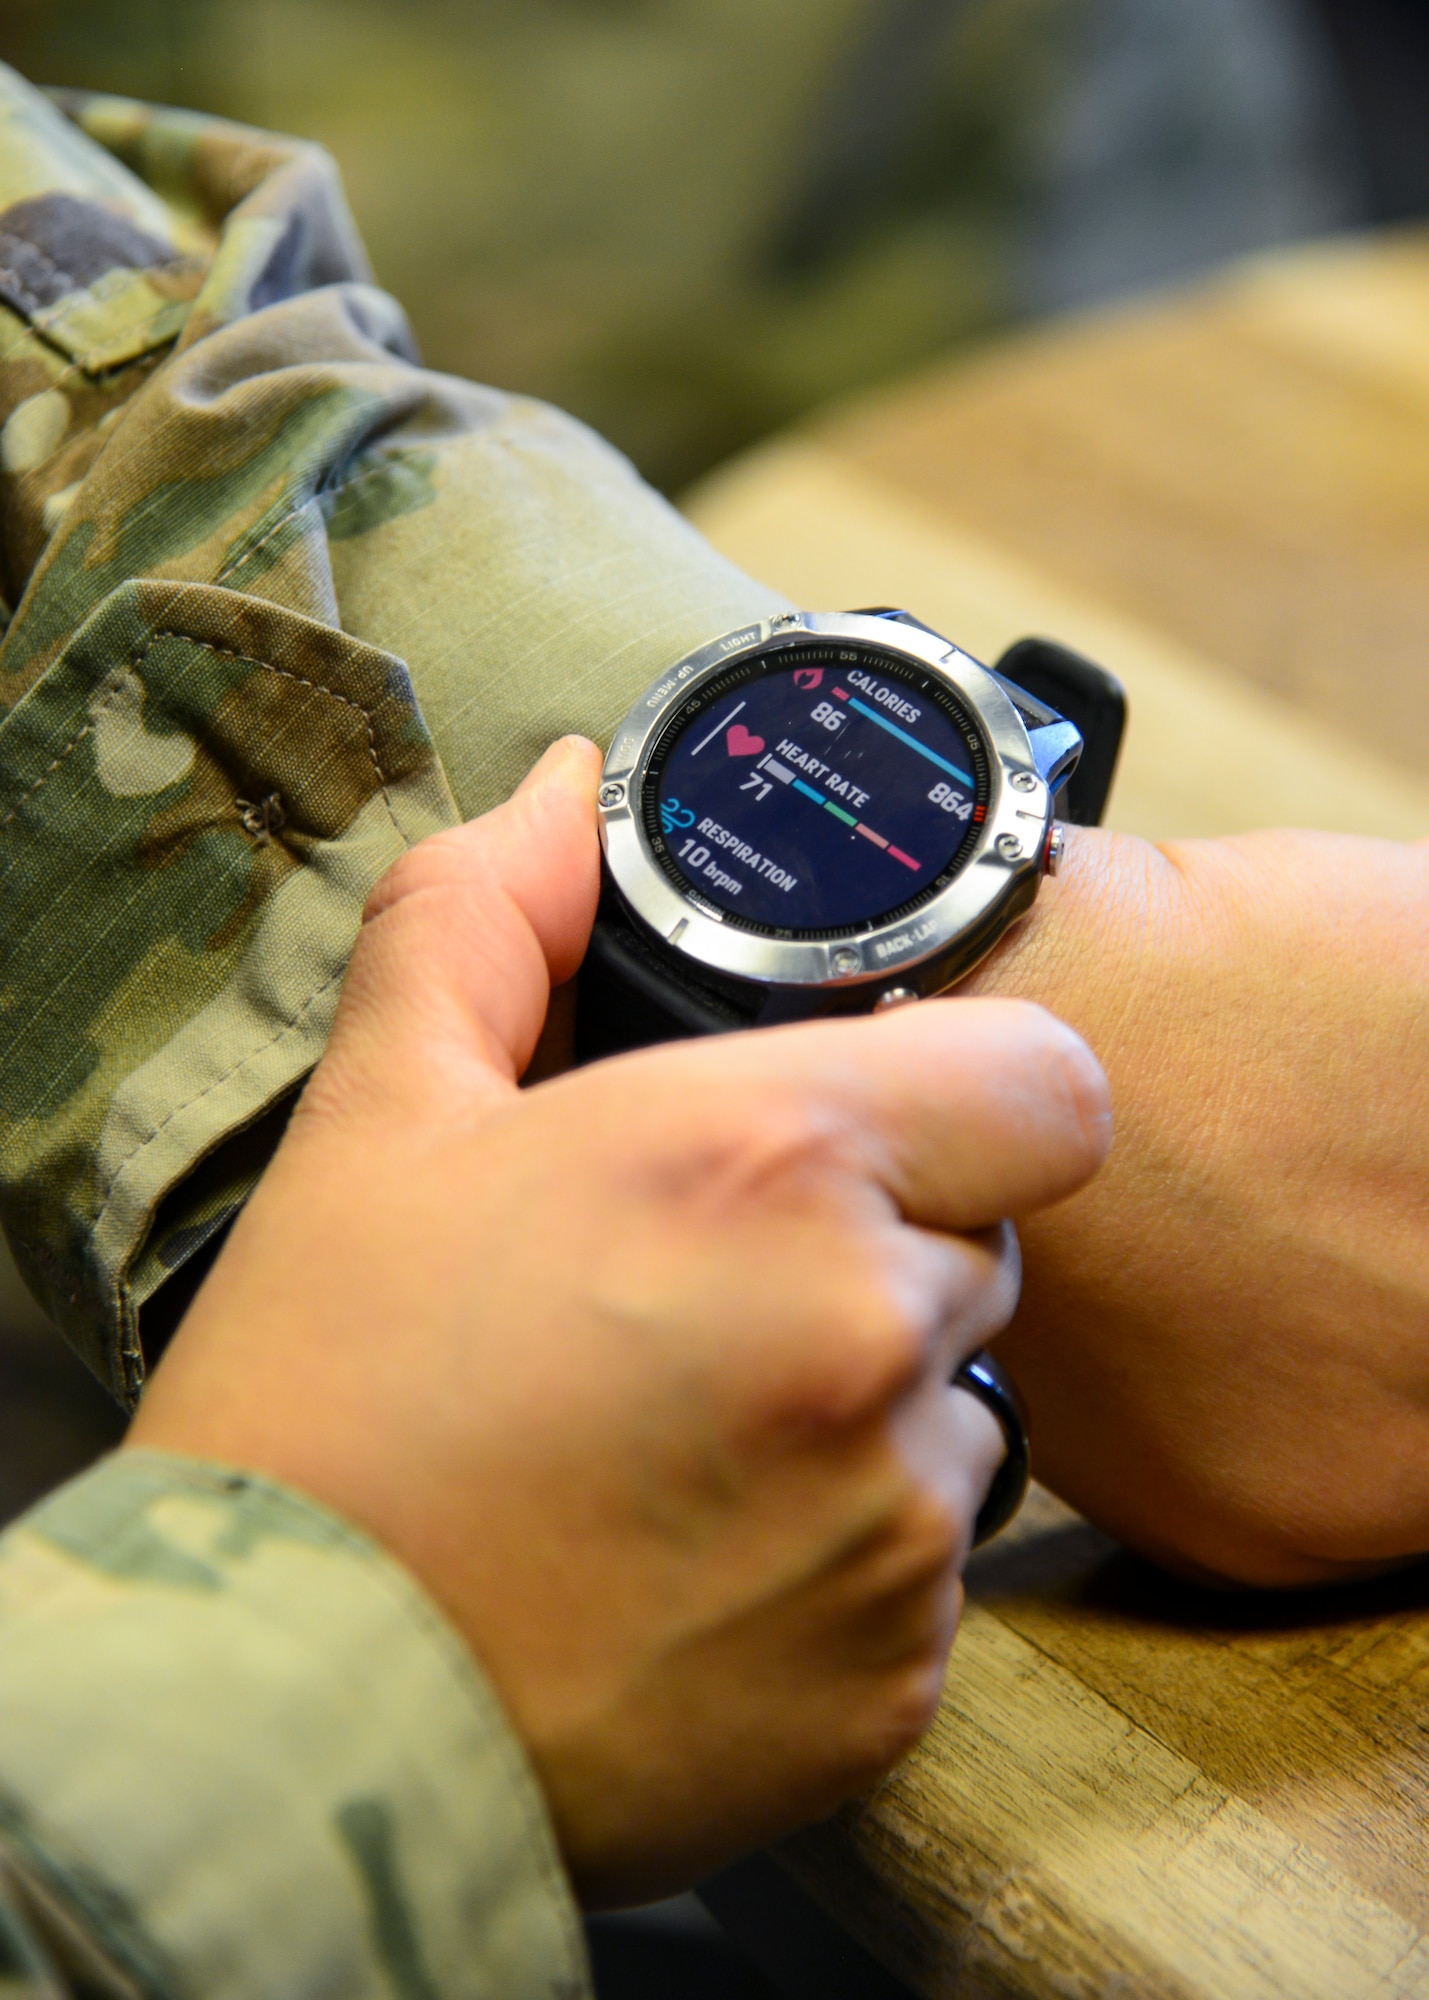 Tech. Sgt. Carmen Turcios Munoz, Ellington Airman Leadership School instructor, shows off a smart watch which provides Airmen biofeedback to improve physical exercise, their sleep, their timing of when to tackle which tasks and other benefits. (Air Force photo by Gary Hatch)